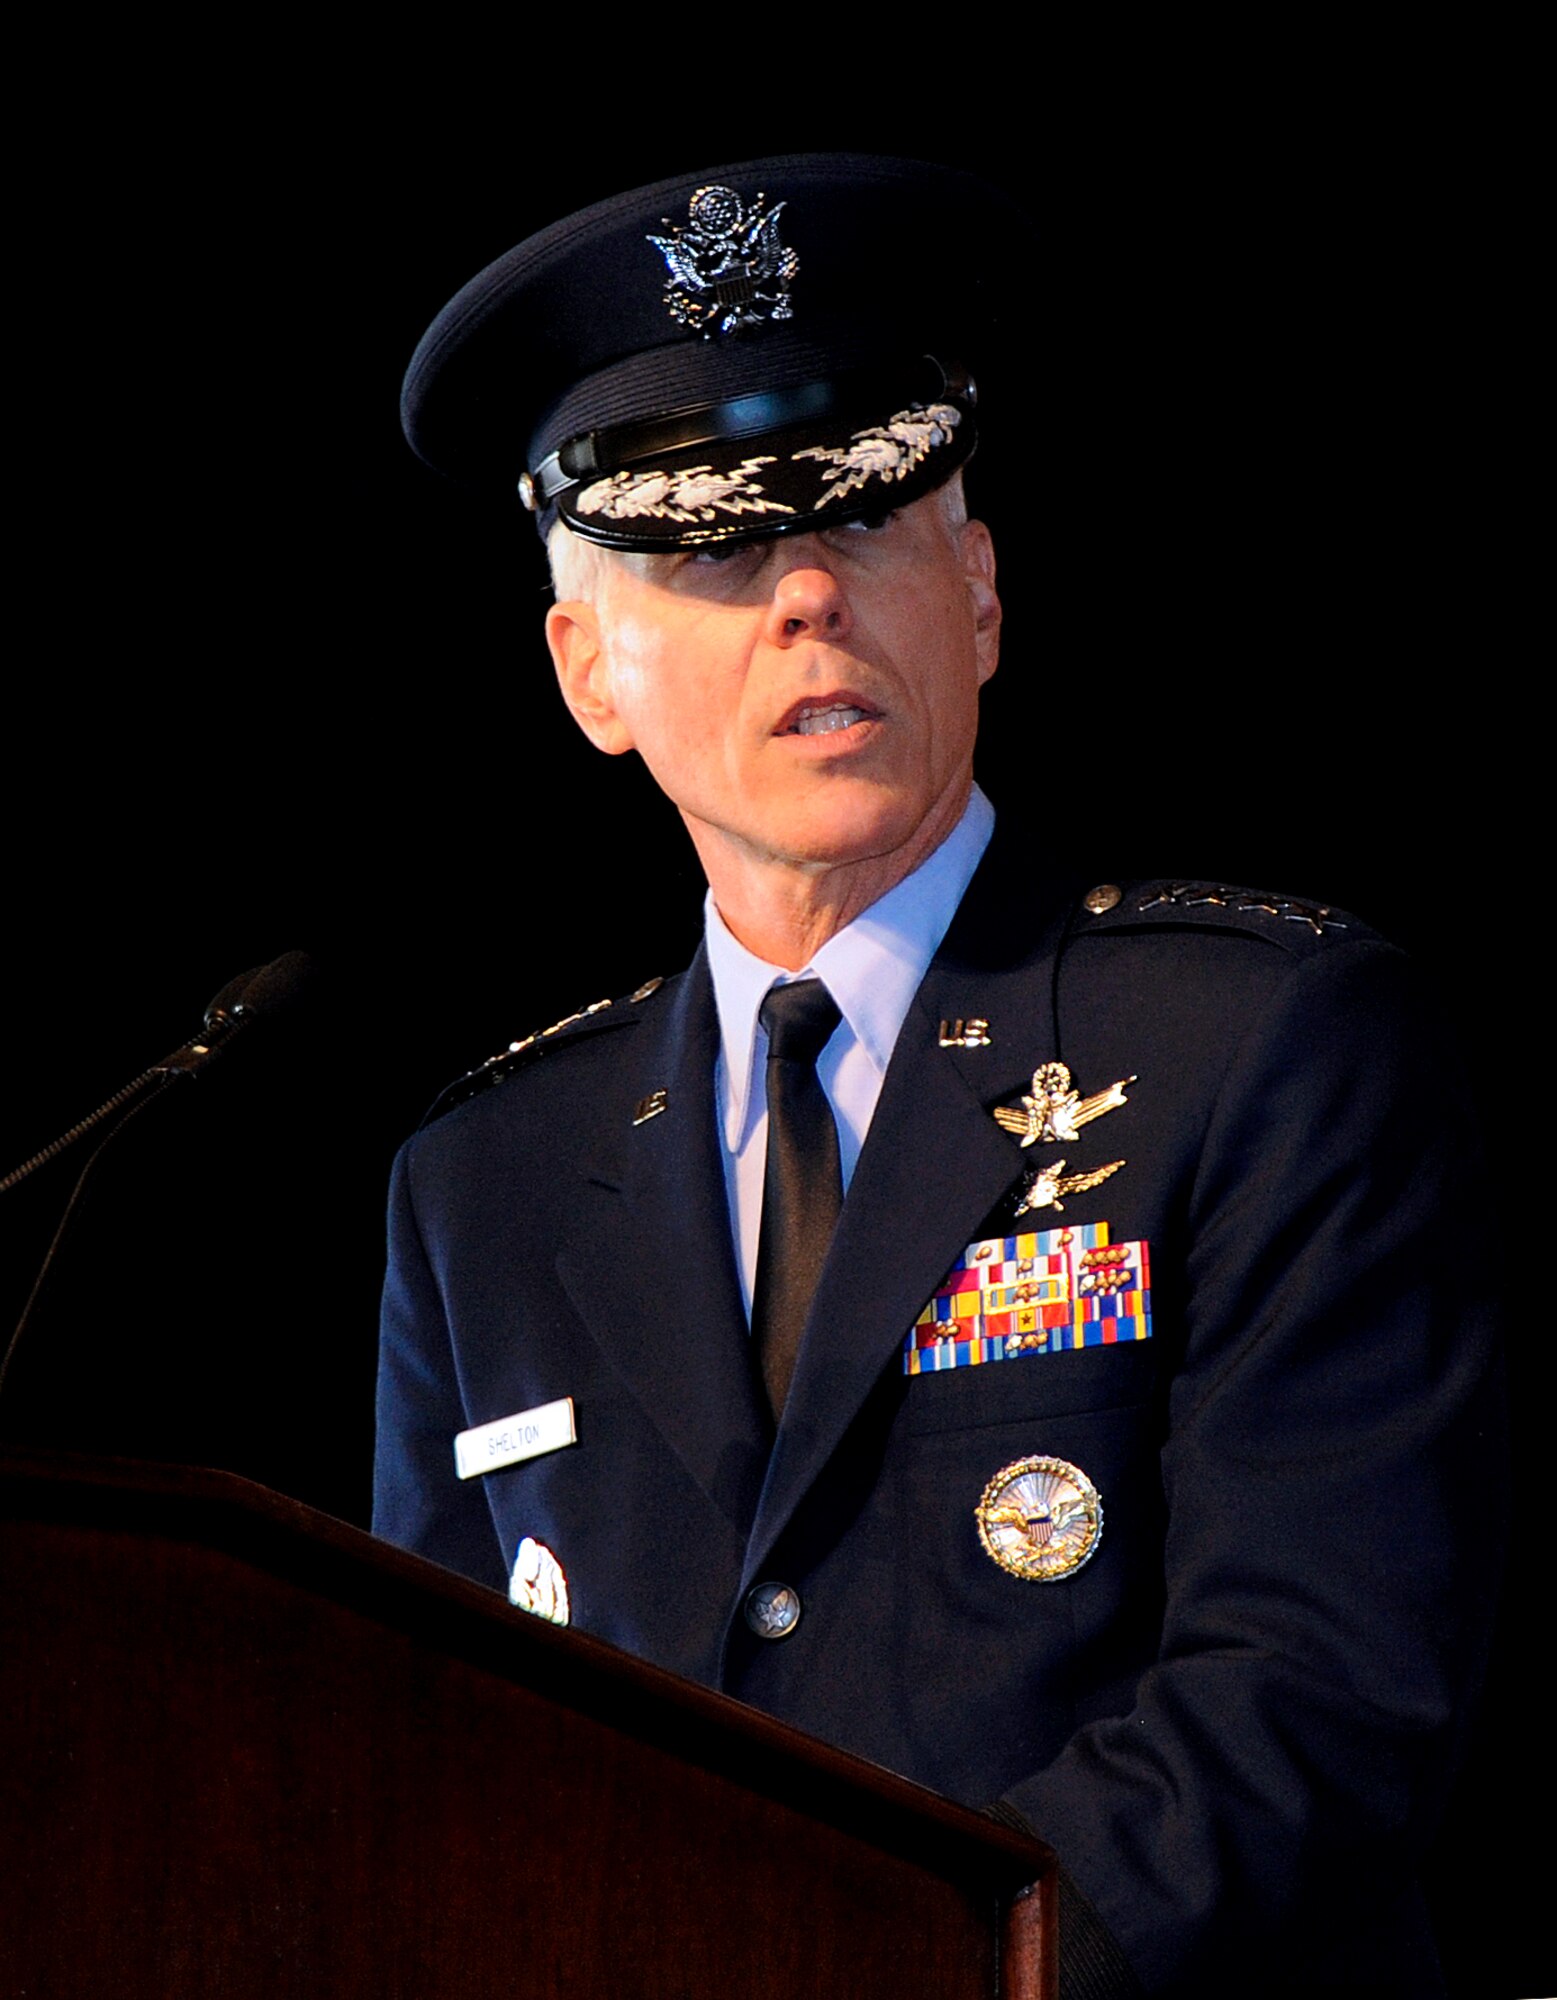 Gen. William L. Shelton, Commander, Air Force Space Command, addresses those present during the AFSPC change of command at Peterson Air Force Base. Upon acceptance of command General Shelton said, “I’ve been in and out of AFSPC since 1986, so to have the good fortune to come back to command this great organization is truly a special privilege.”He has become the 15th commander of AFSPC Jan. 5. (Air Force photo/Duncan Wood)